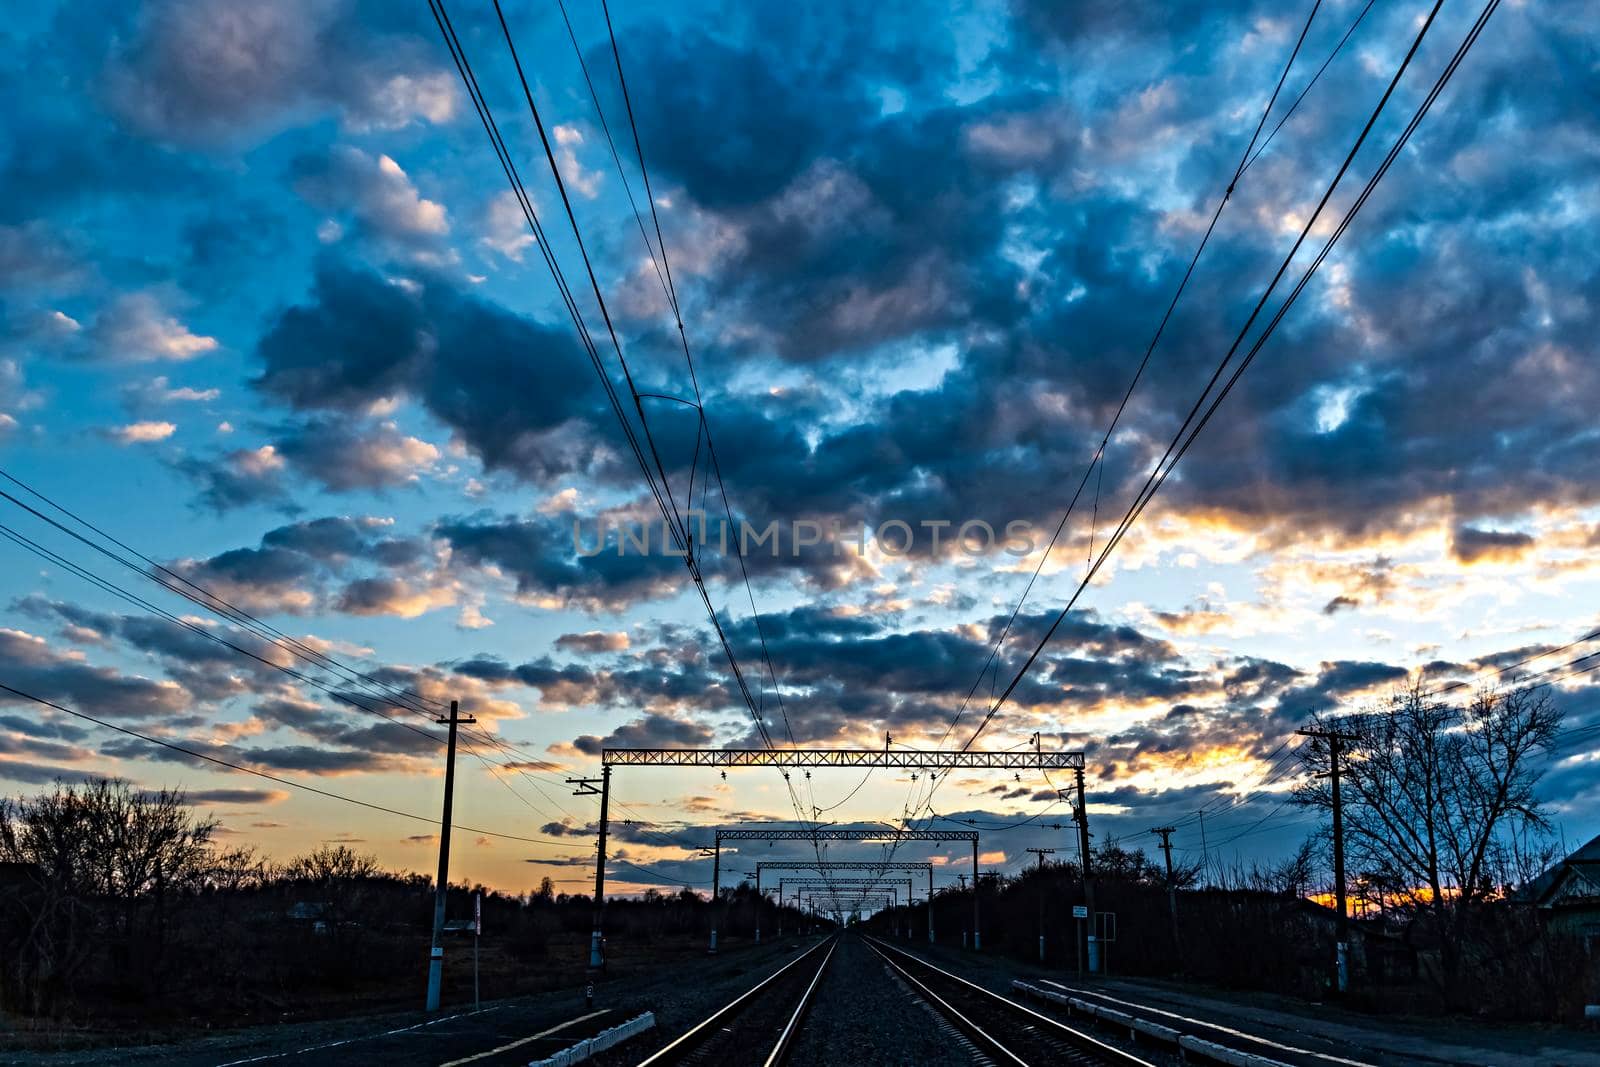 A railway with railway tracks, poles and wires at the dawn of the sun.The heavenly light of the sun.Dramatic evening sky with clouds and rays of the sun.Sunlight at evening sunset or morning dawn.View by YevgeniySam